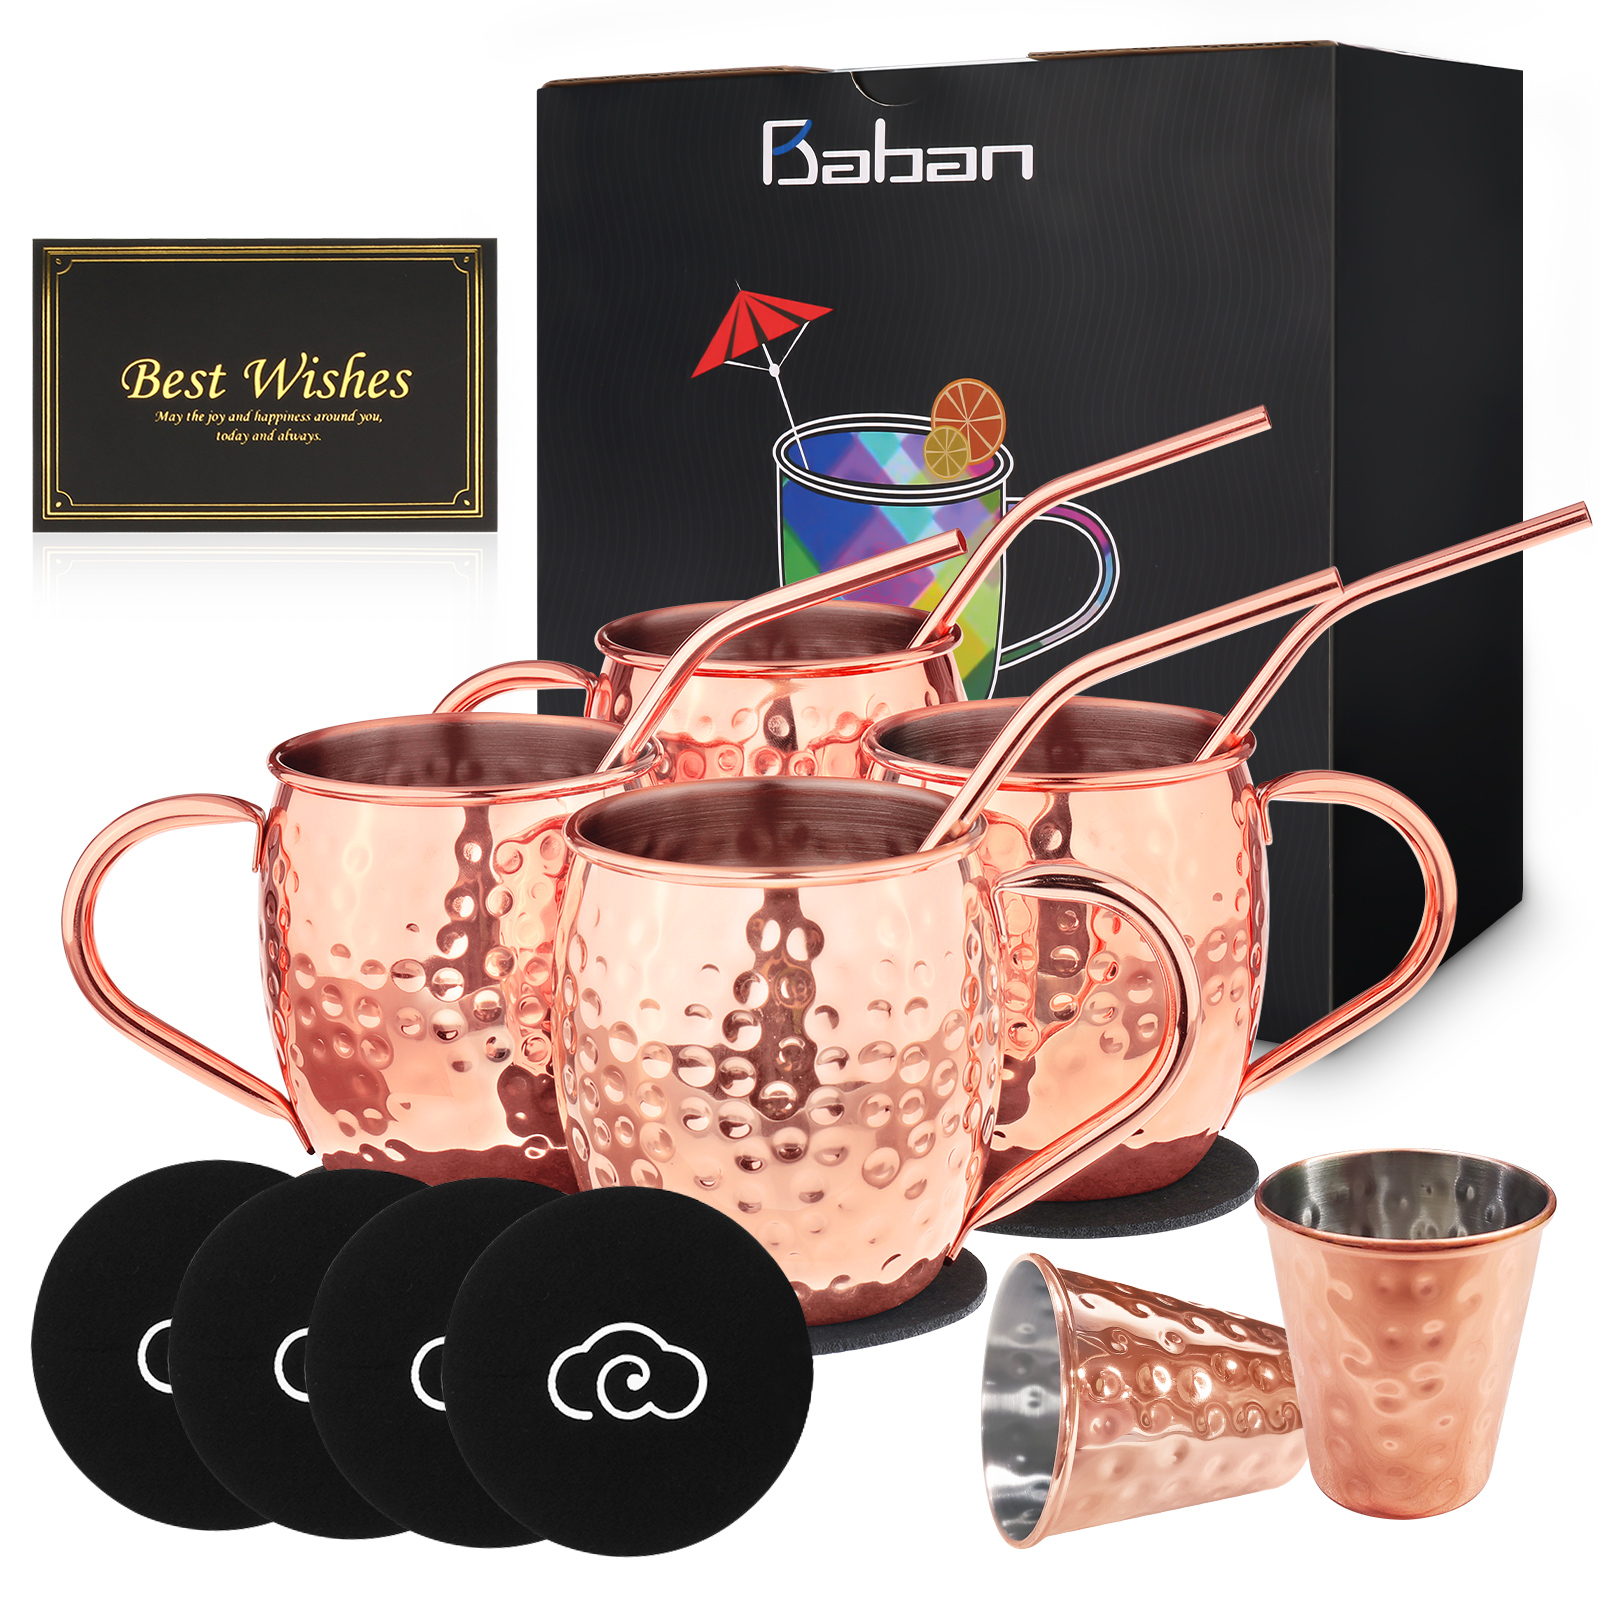 Moscow-Mule-Cups-Set-Copper-Mugs-Moscow-Mule-Mug-with-Shot-Glasses-1947569-12